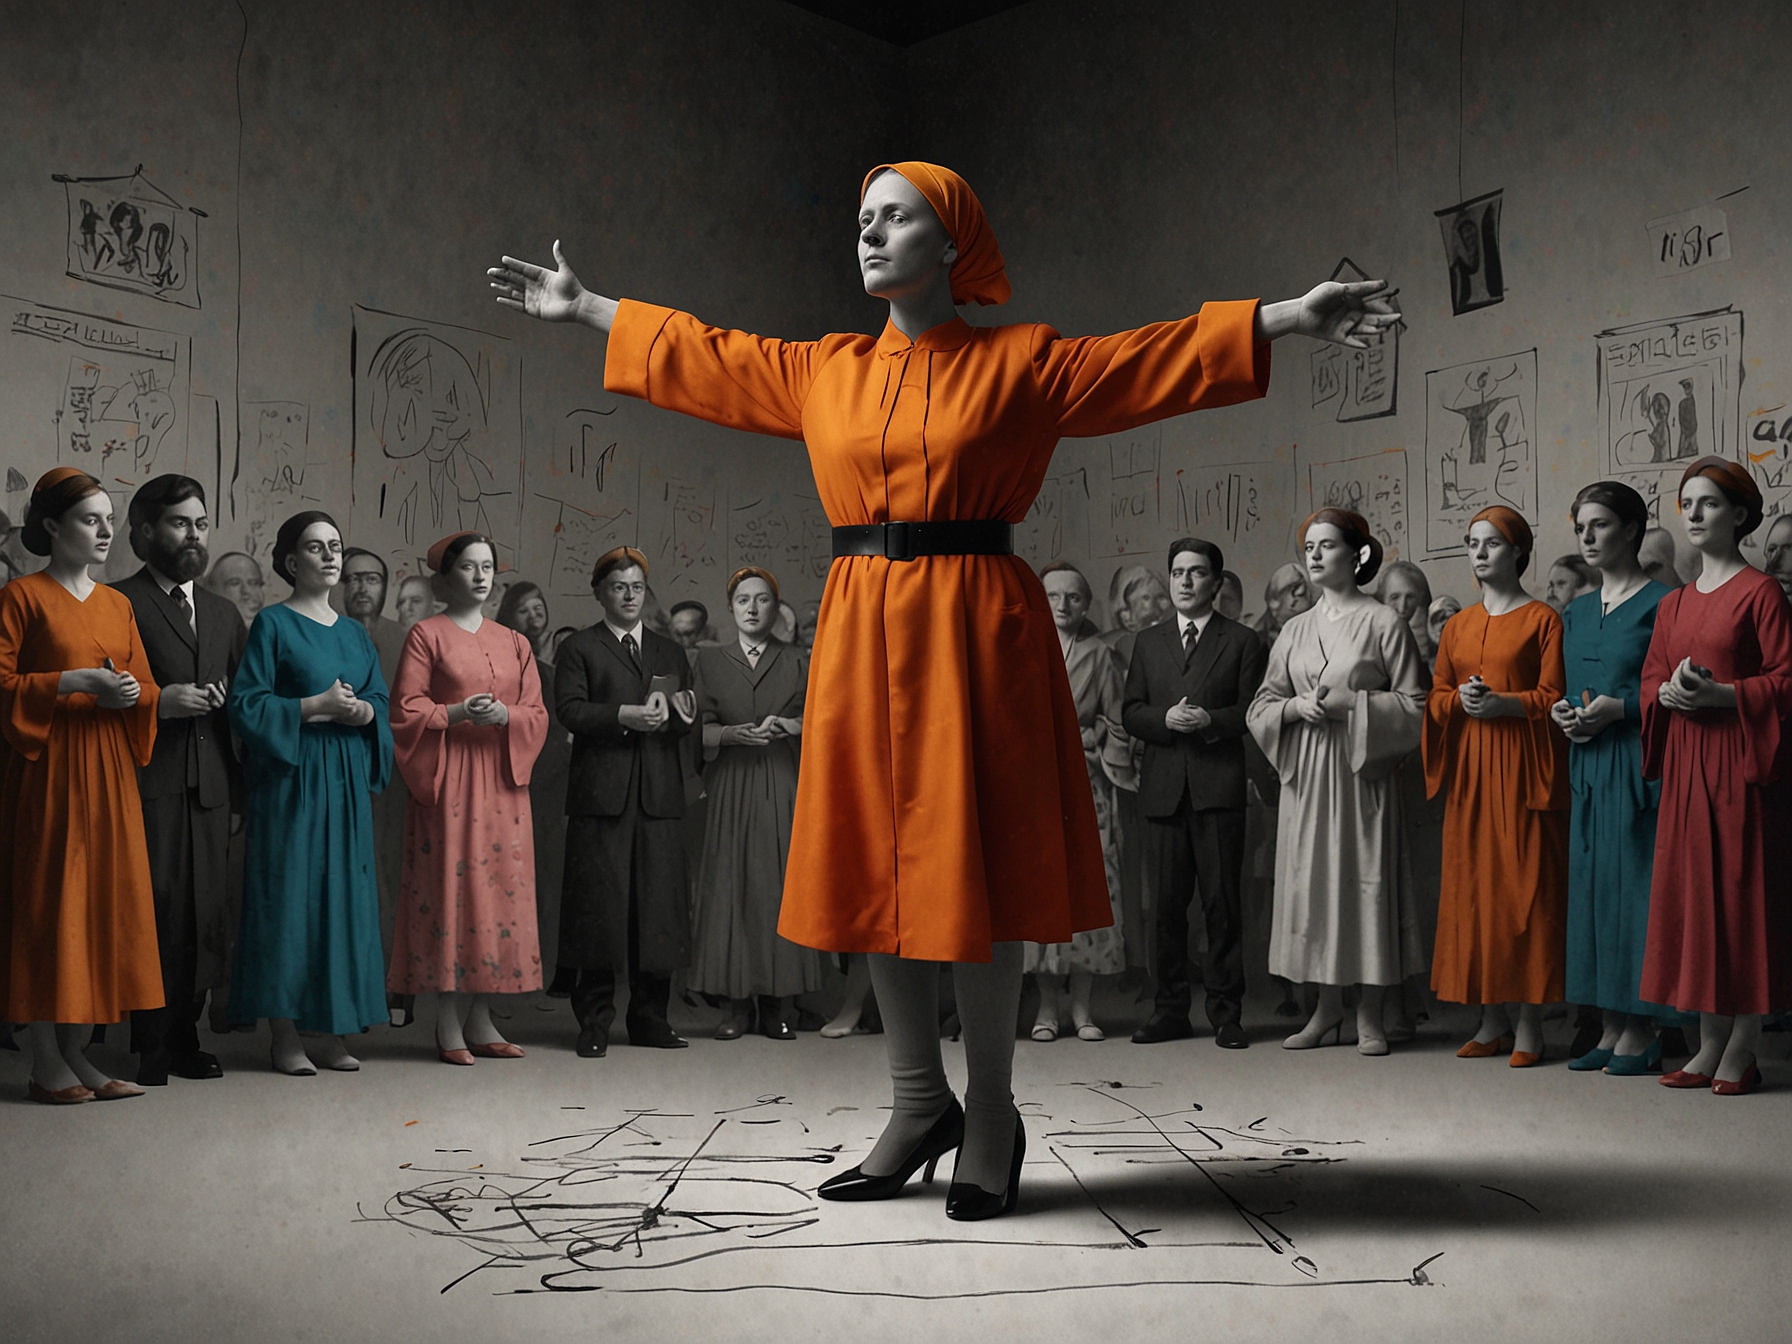 Stenberg, dressed in vibrant attire, performs emotional choreography against a backdrop of evocative imagery, highlighting the impact of online hate and spreading a message of empathy and understanding.